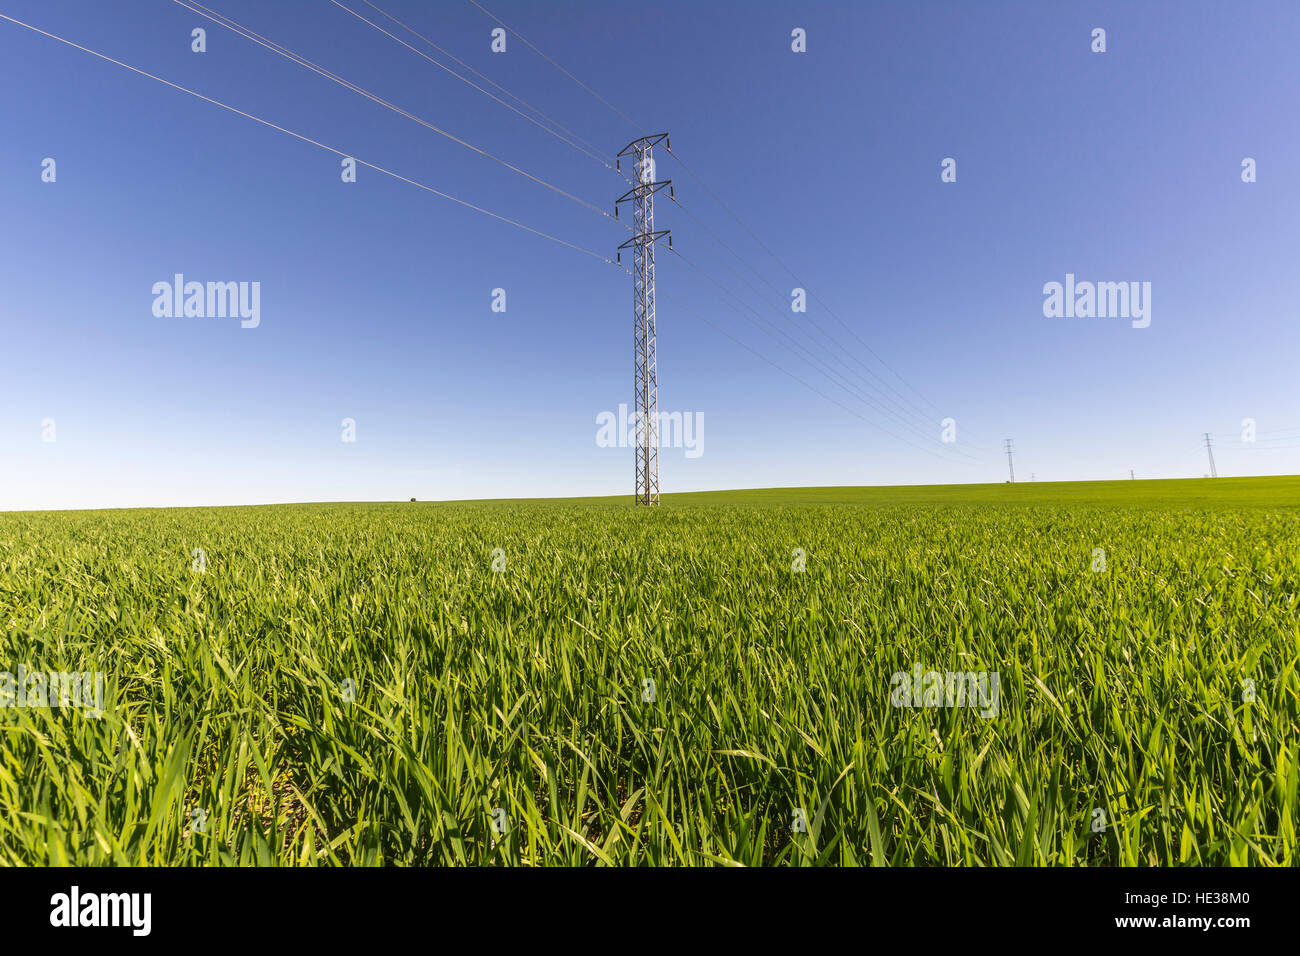 Electric tower in green field, wheat crop Stock Photo